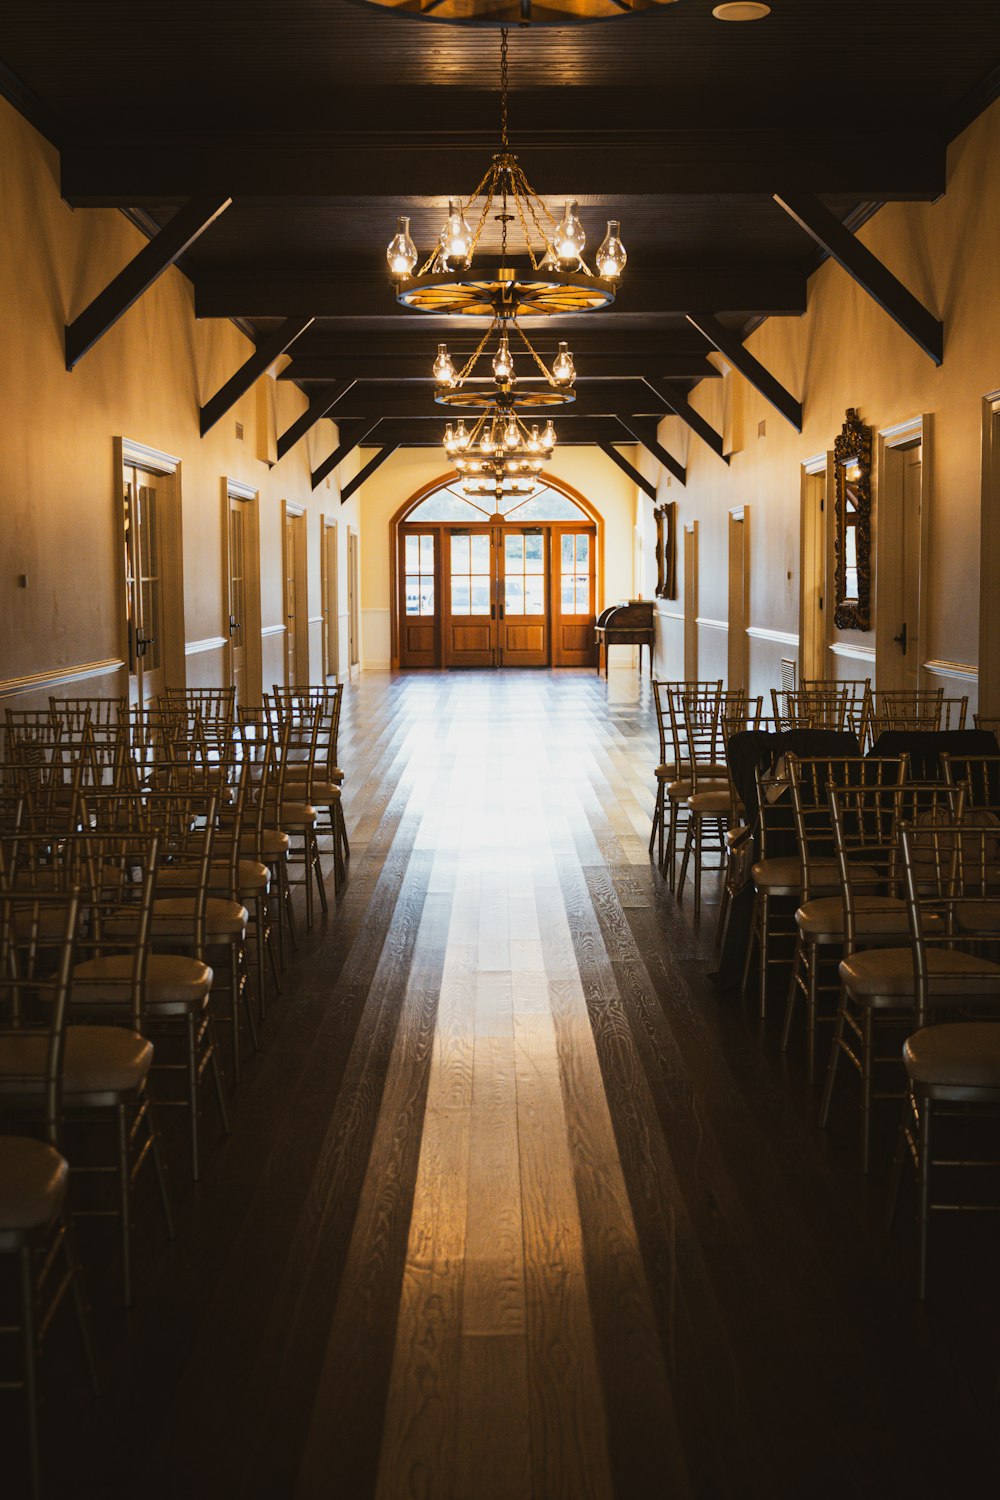 a large hall with rows of chairs and chandeliers